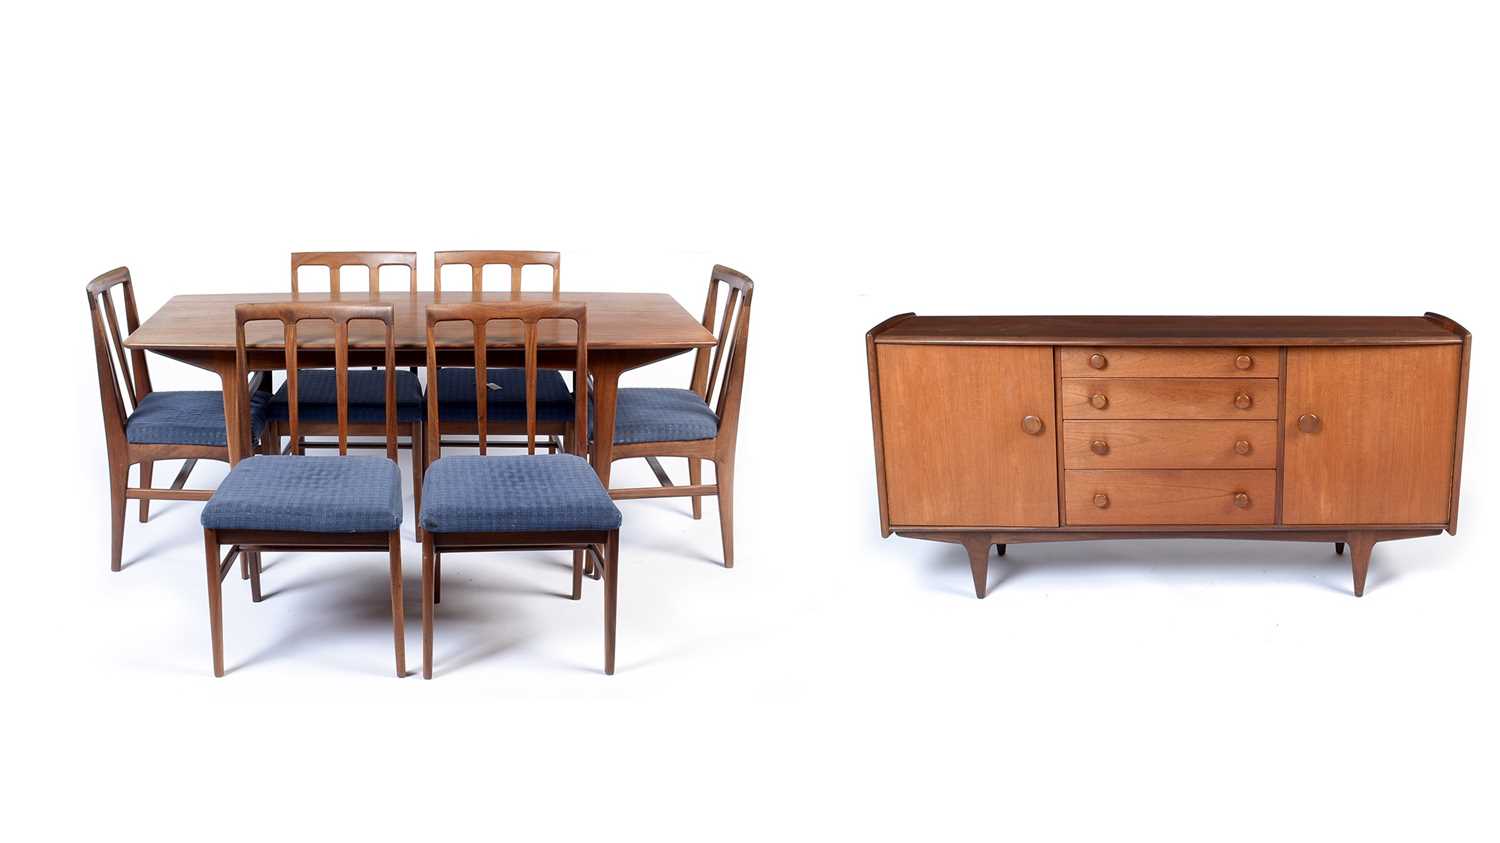 John Herbert for A. Younger Ltd: a mid Century Volnay range dining room suite.